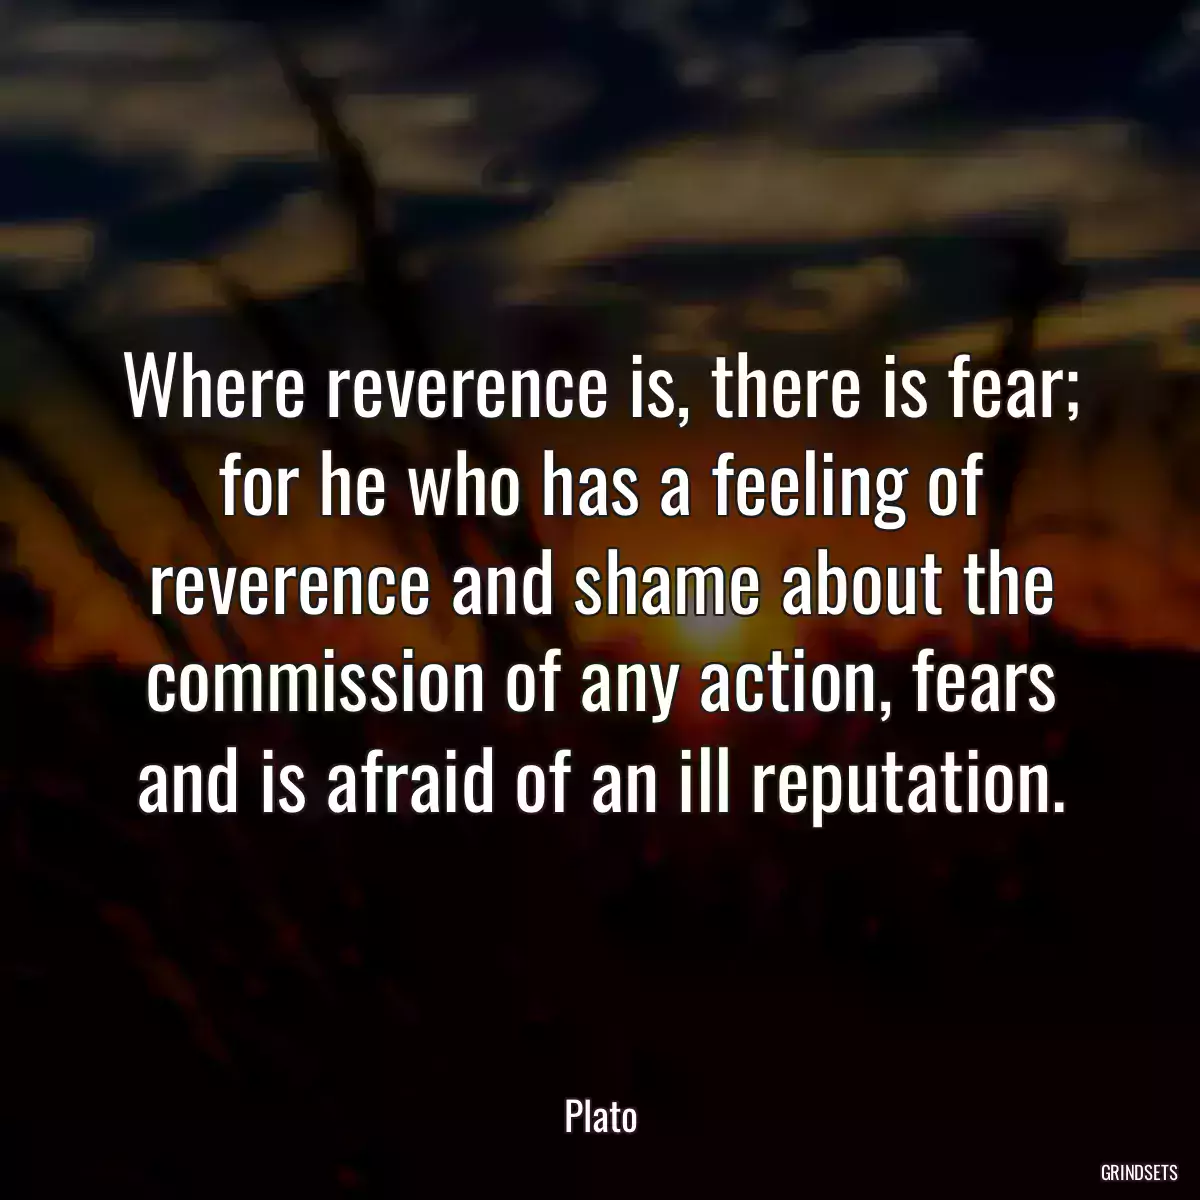 Where reverence is, there is fear; for he who has a feeling of reverence and shame about the commission of any action, fears and is afraid of an ill reputation.